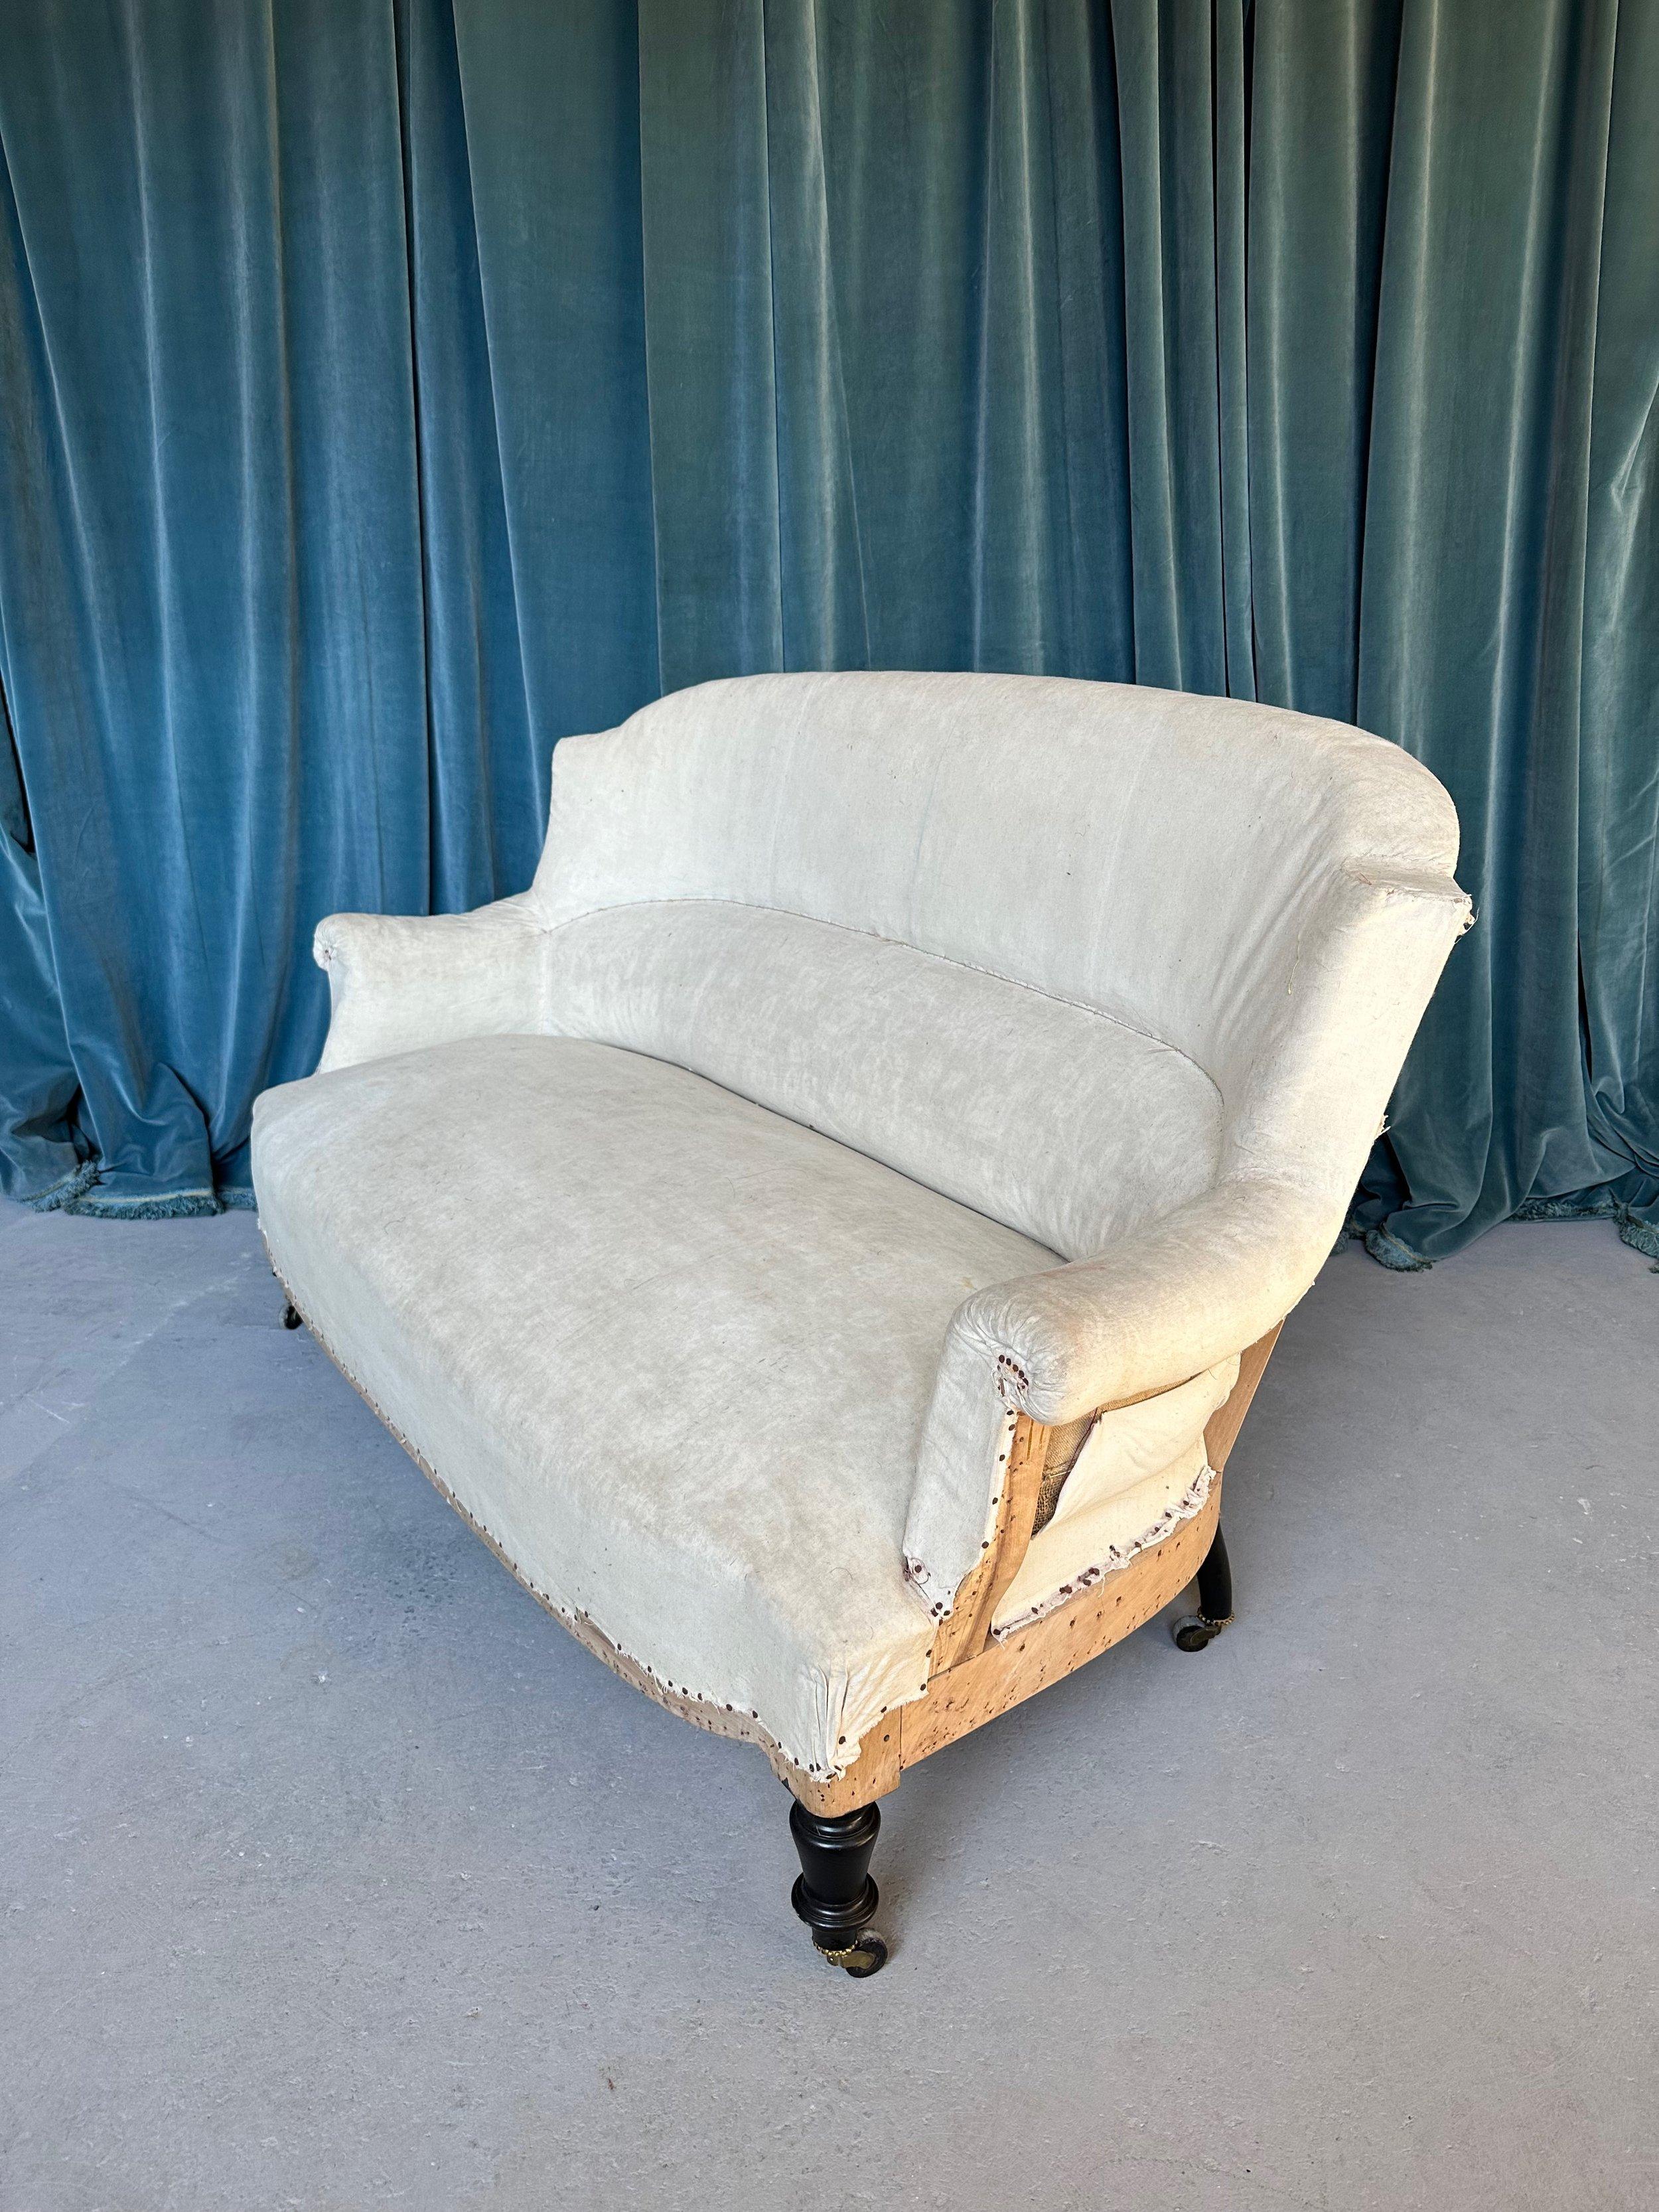 A handsome small French sofa or settee in the Napoleon III style. The classic “chapeau de gendarme“ shape of the back balances perfectly with the gentle curves of the sofa. With the built in lumbar support, the settee is not only elegant in design